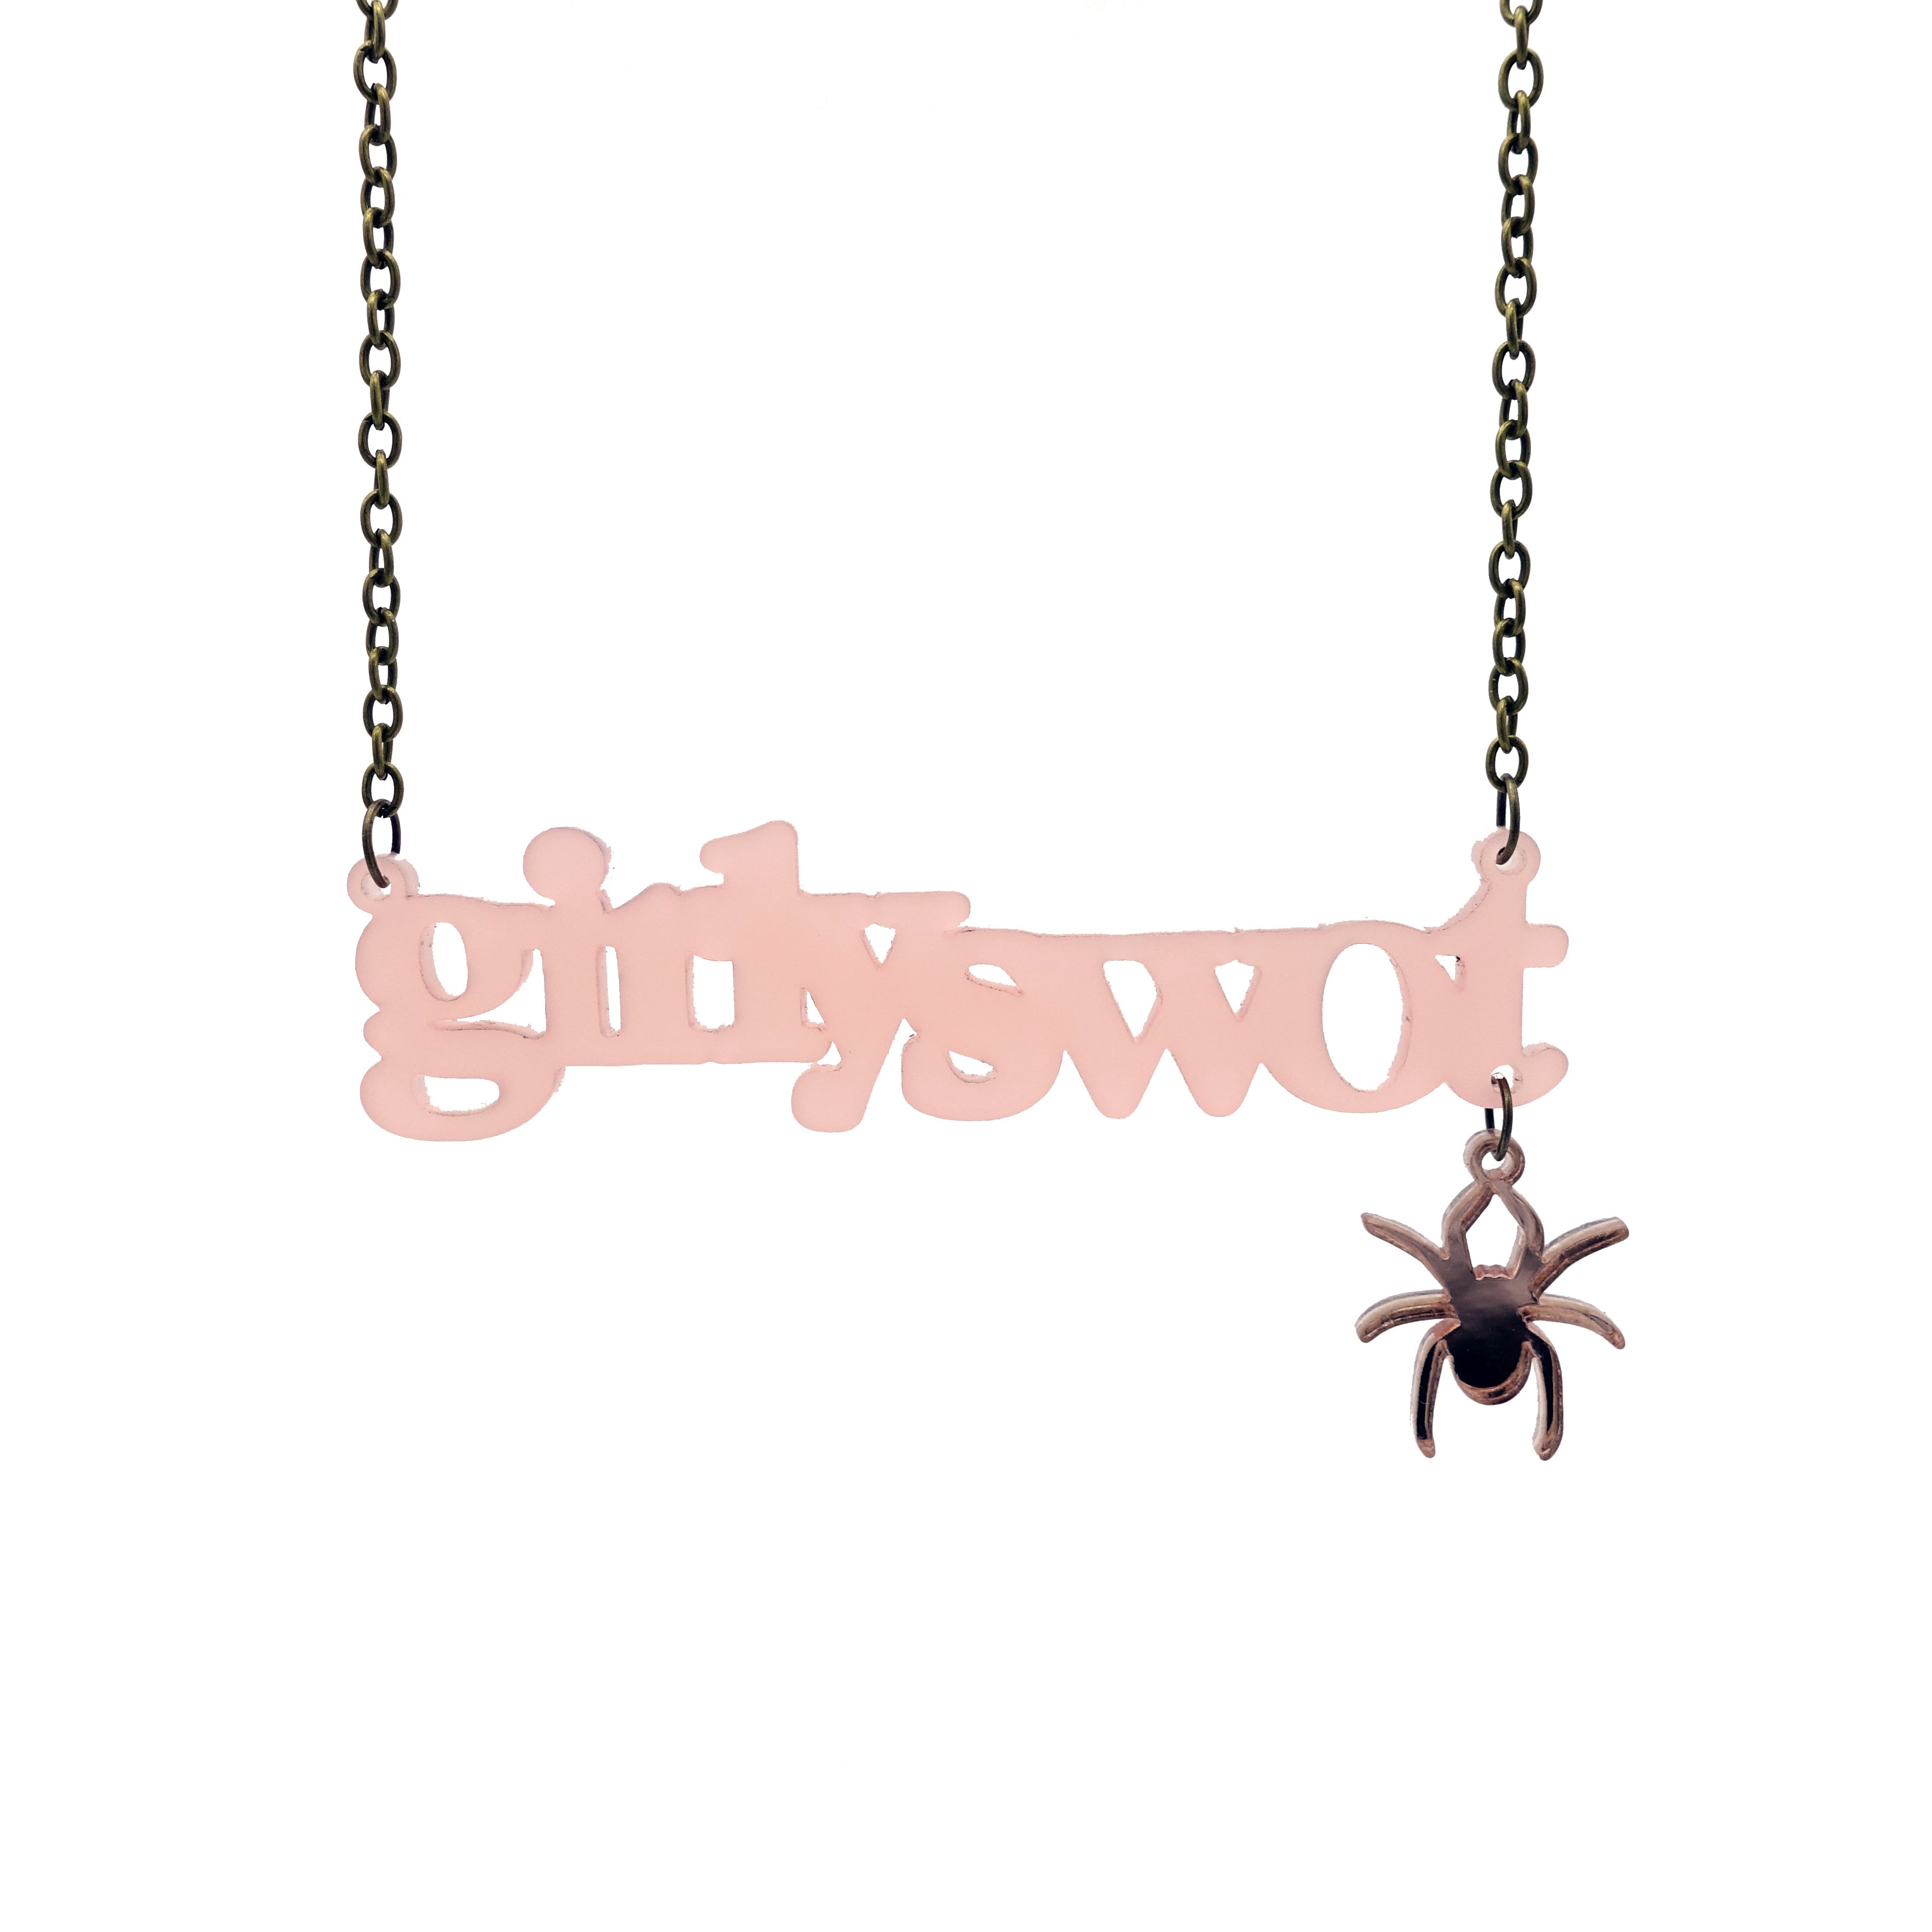 Girly swot necklace in blush frost with hanging rose gold mirror Lady Hale spider. All hail Lady Hale! 